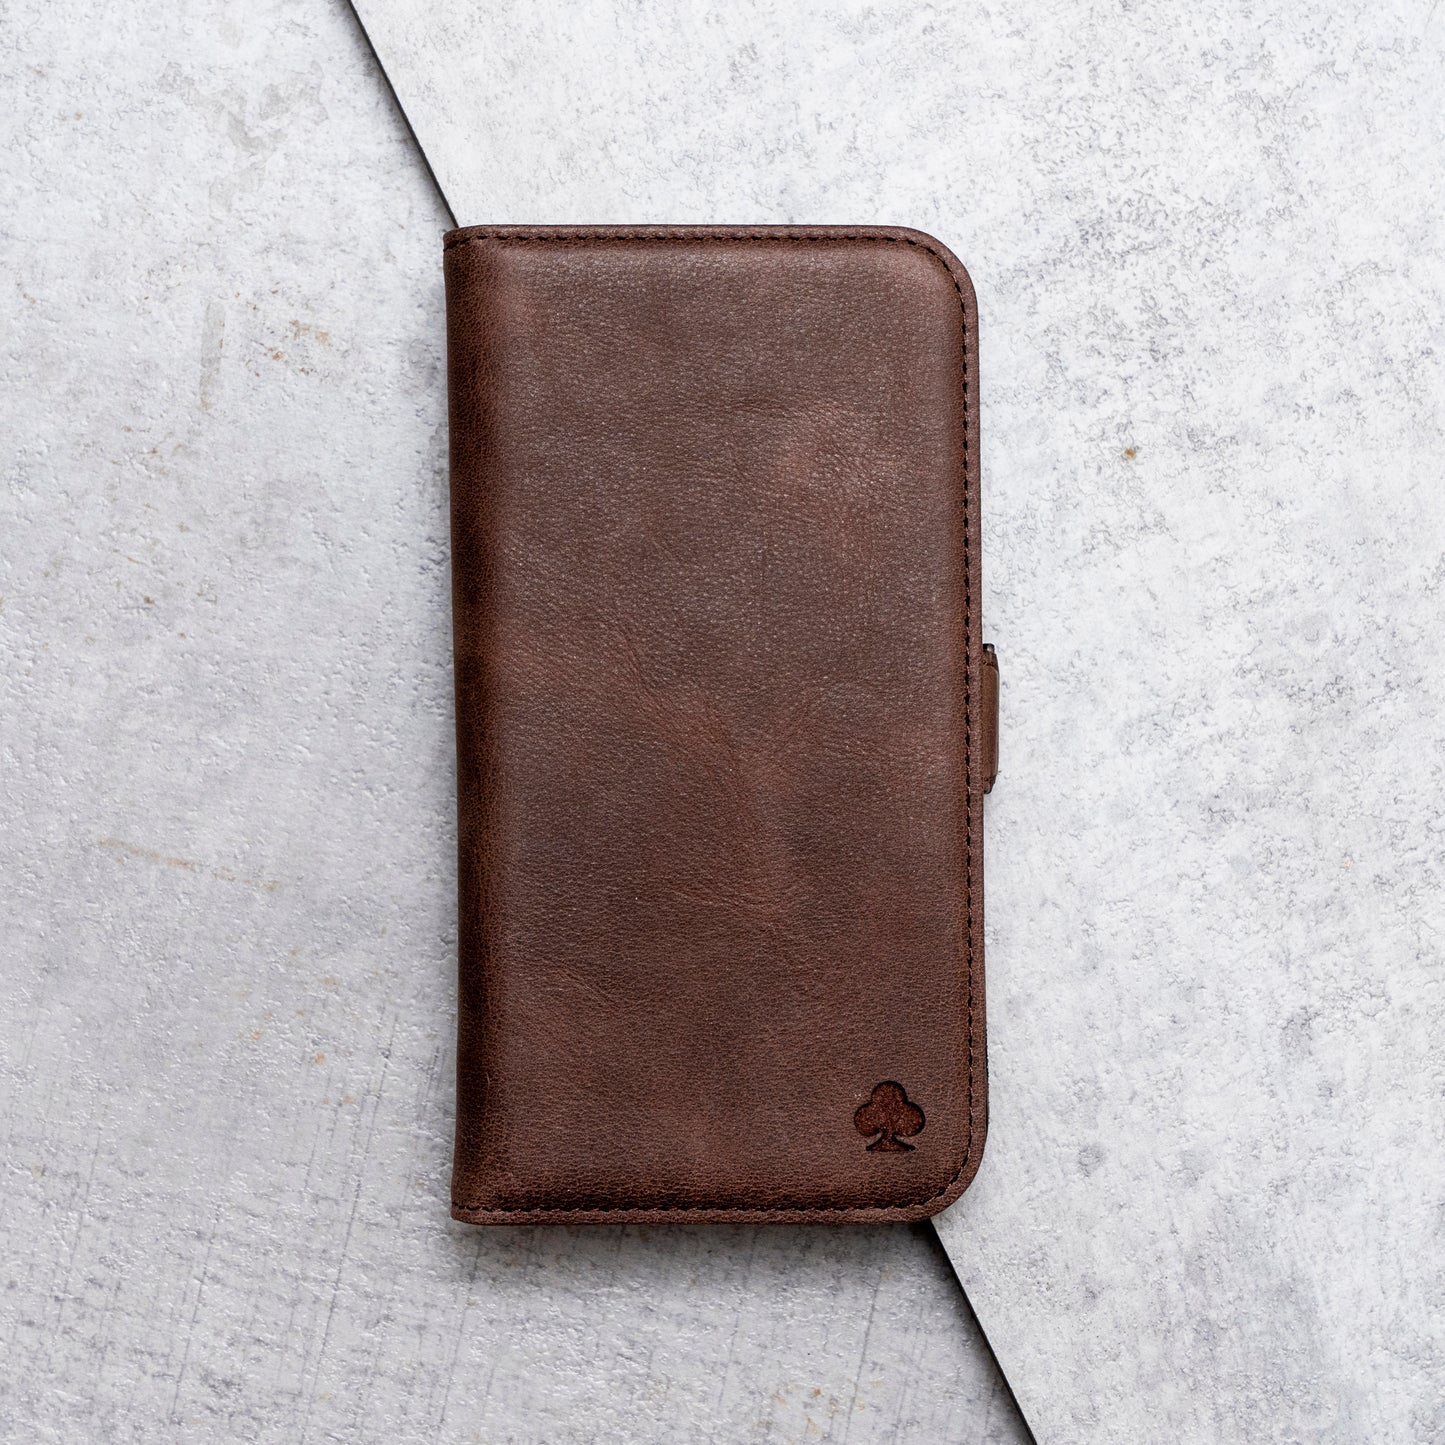 iPhone 15 Leather Case. Premium Slim Genuine Leather Stand Case/Cover/Wallet (Chocolate Brown)